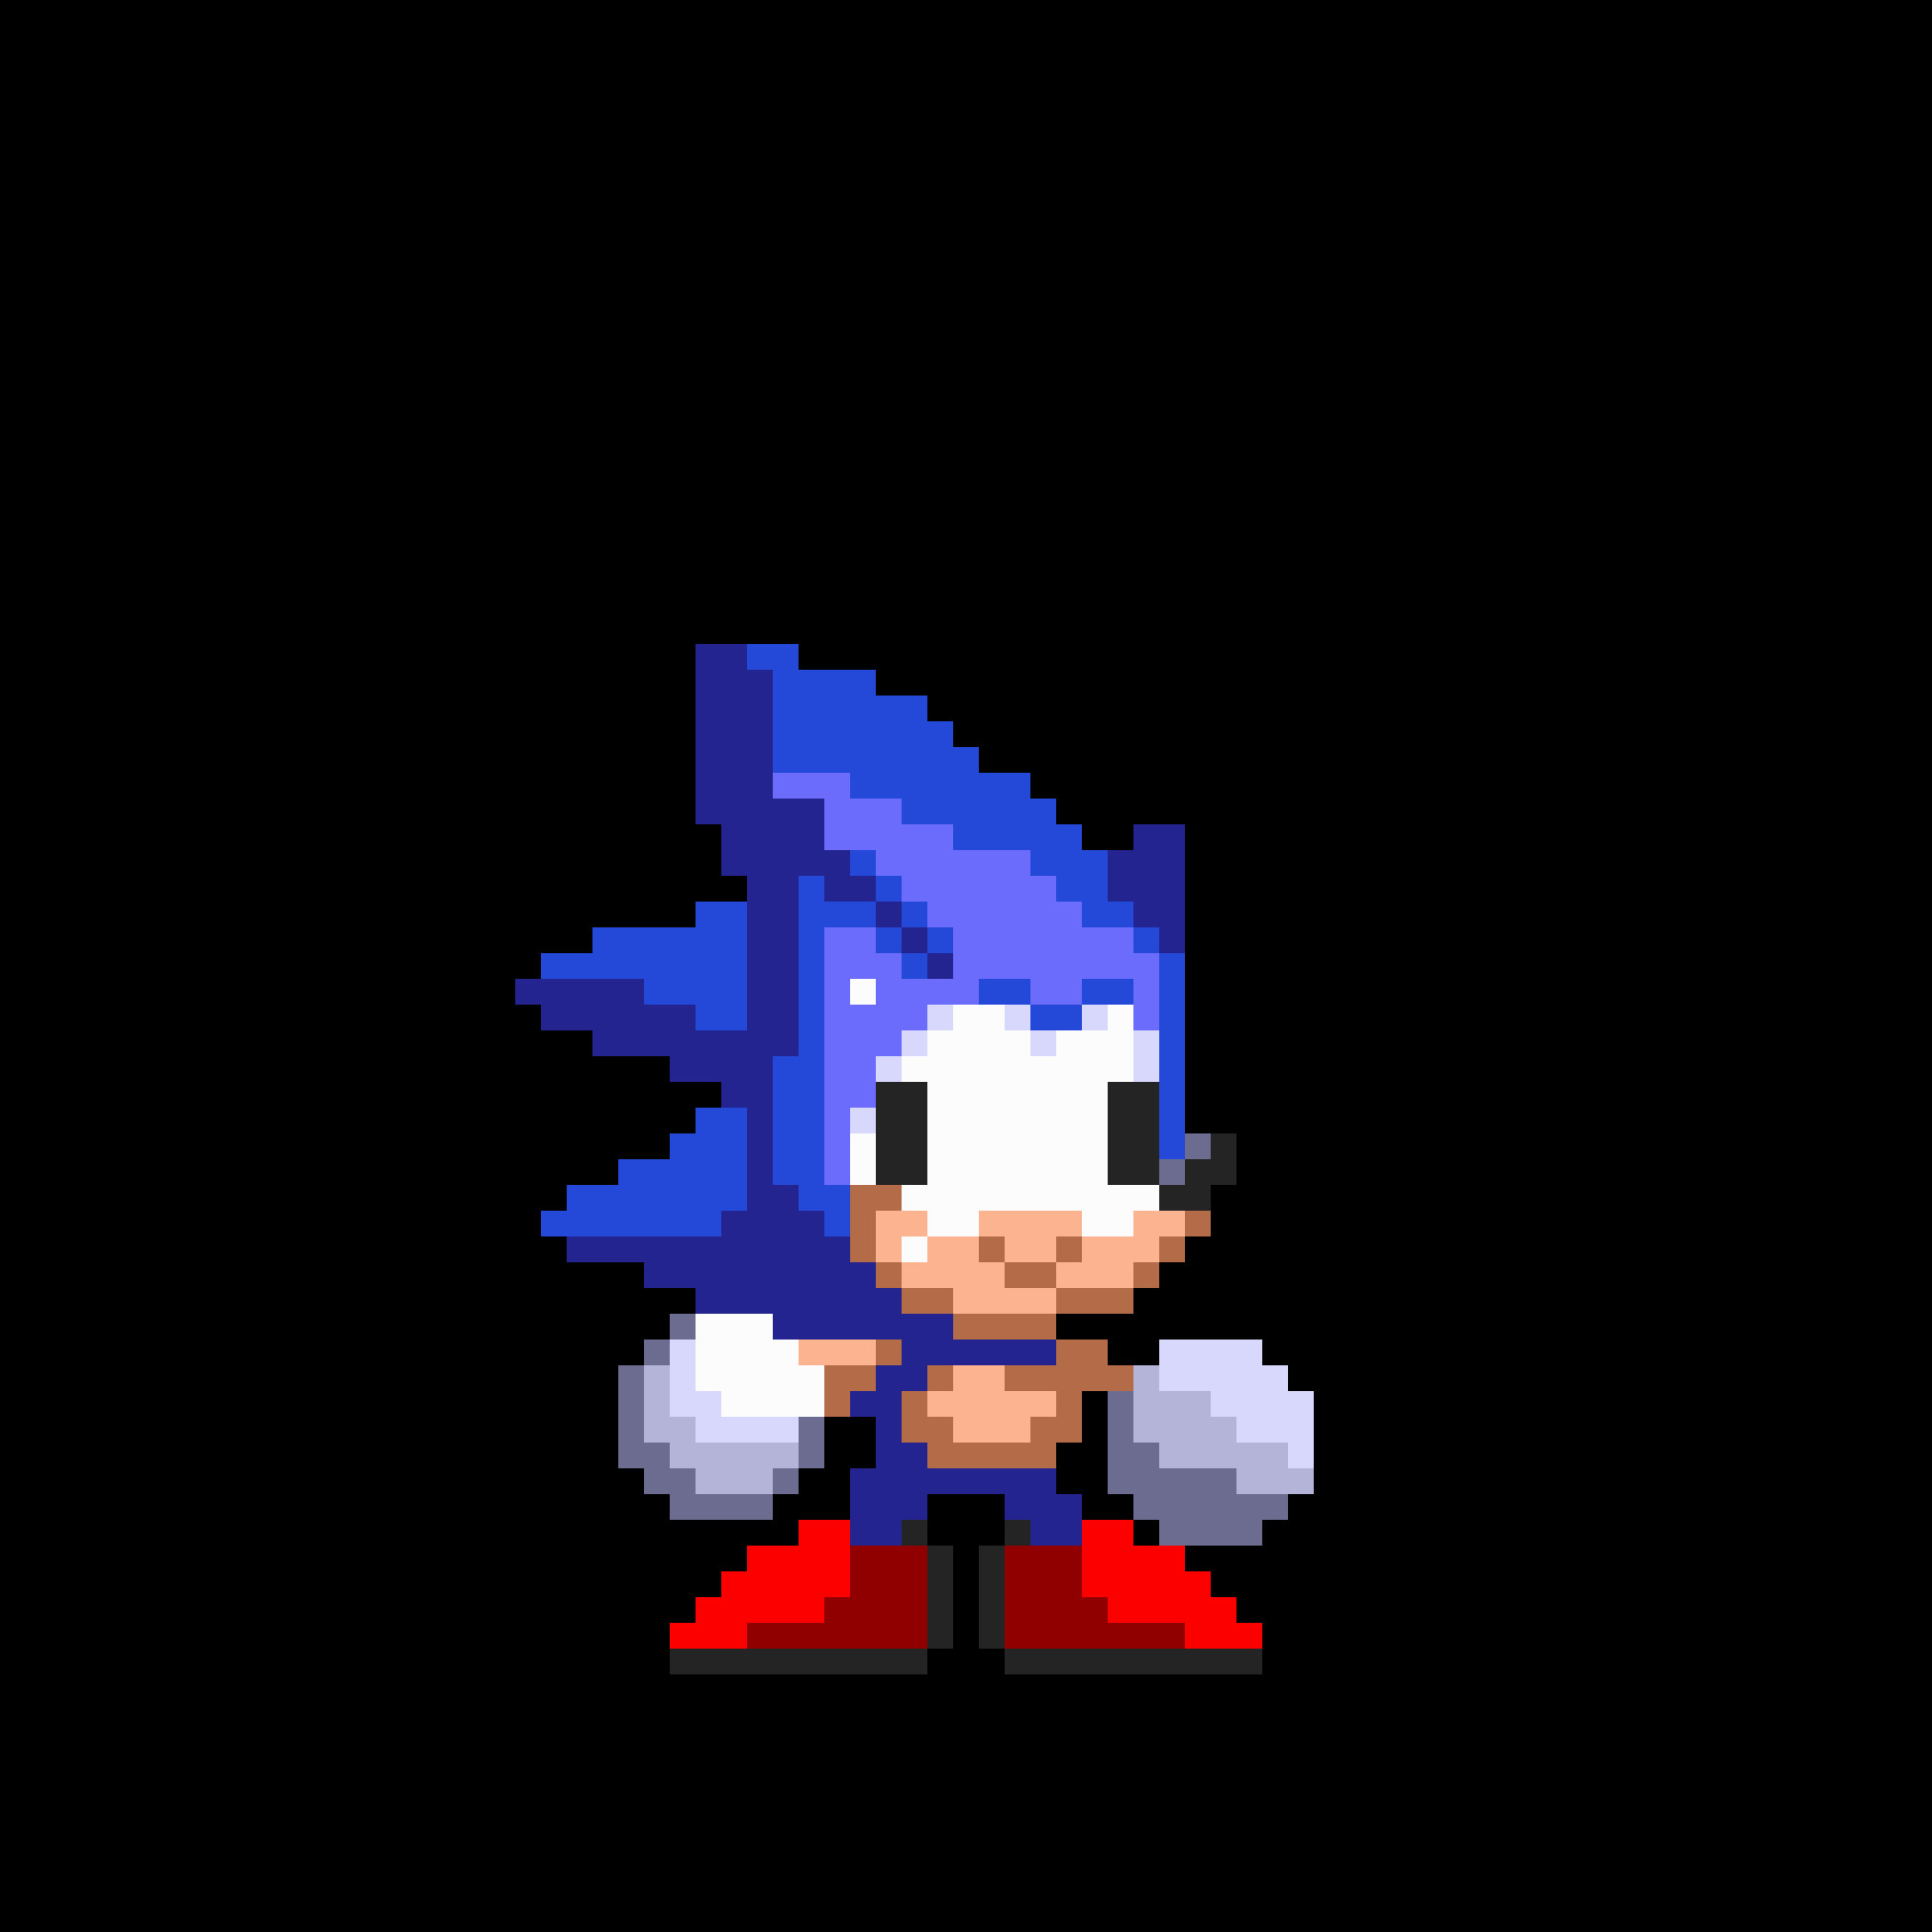 Sonk.rom in Sonic 3 A.I.R [Sonic 3 A.I.R.] [Concepts]